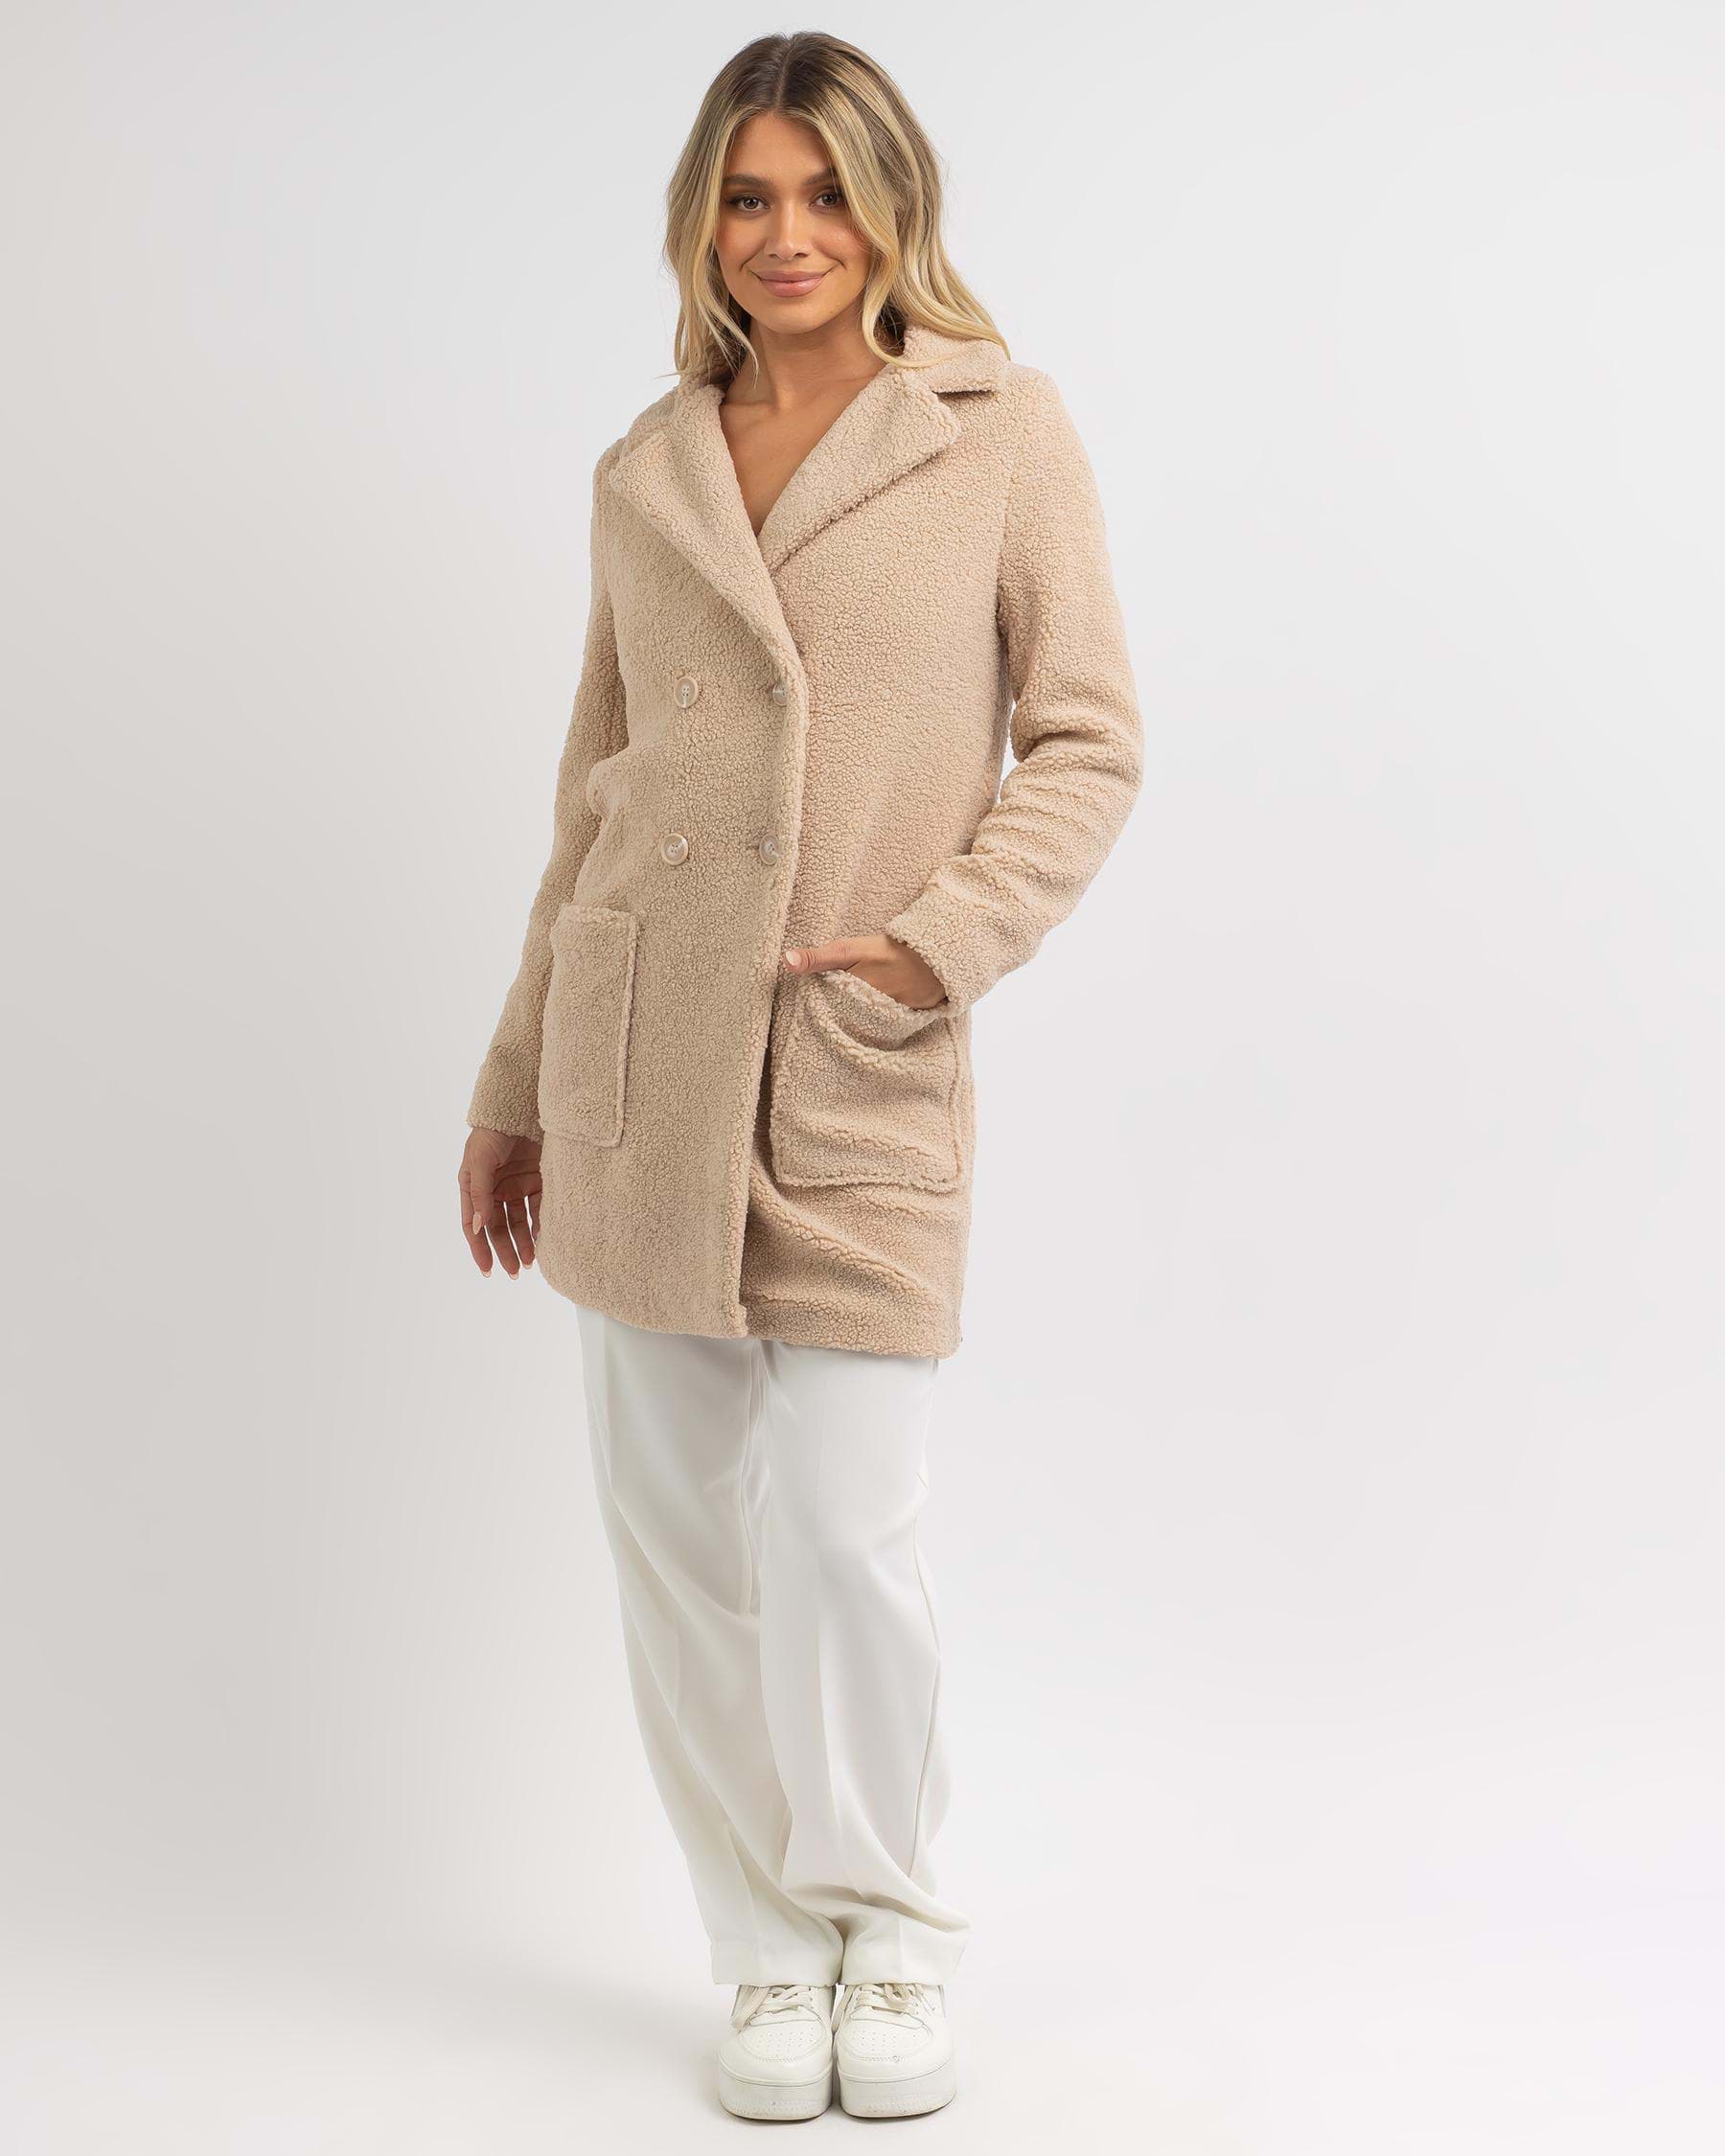 Ava And Ever Miranda Jacket In Camel - Fast Shipping & Easy Returns ...